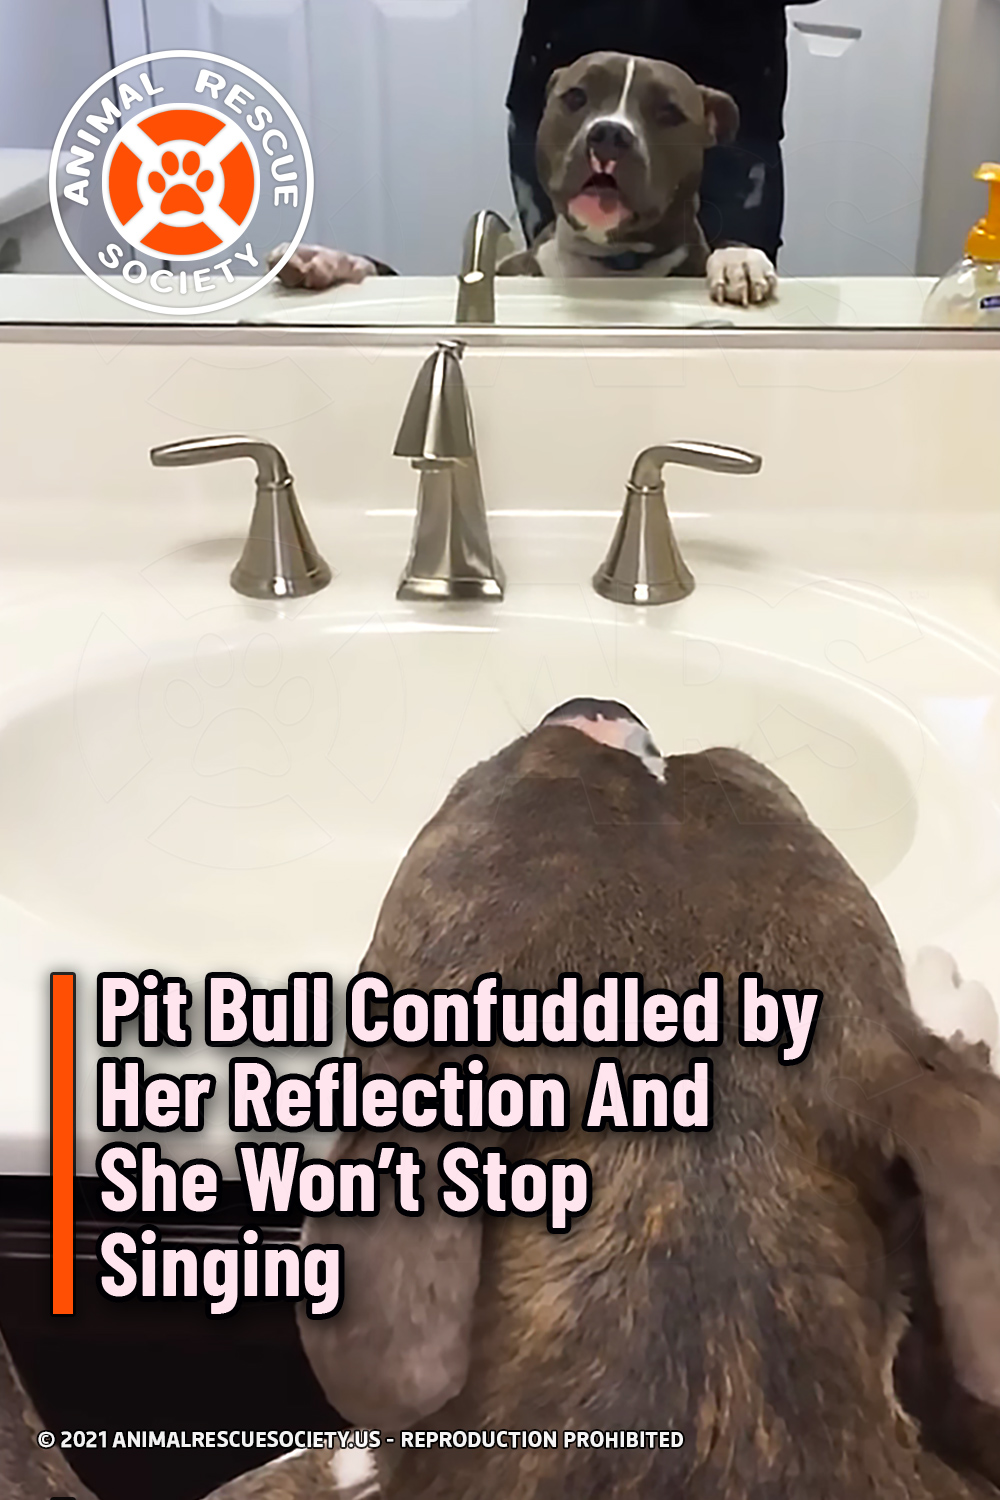 Pit Bull Confuddled by Her Reflection And She Won’t Stop Singing